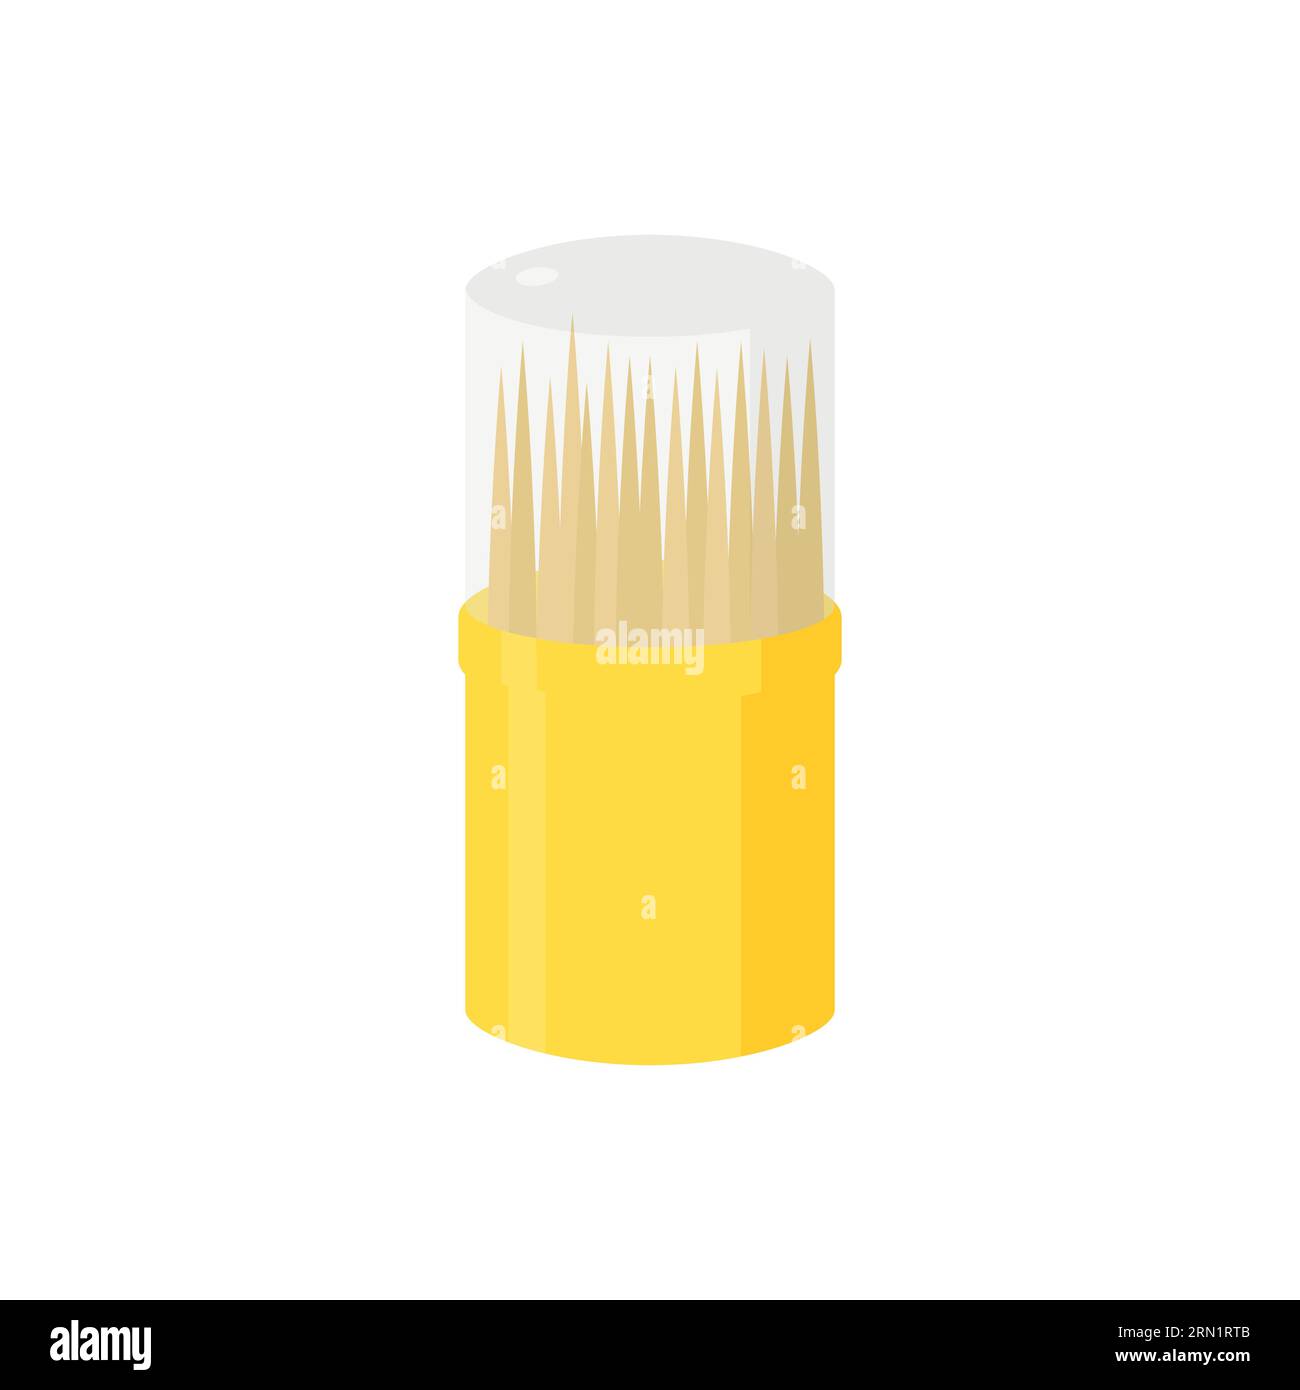 Toothpicks illustration. Container, wooden sticks, tooth pick Stock Vector